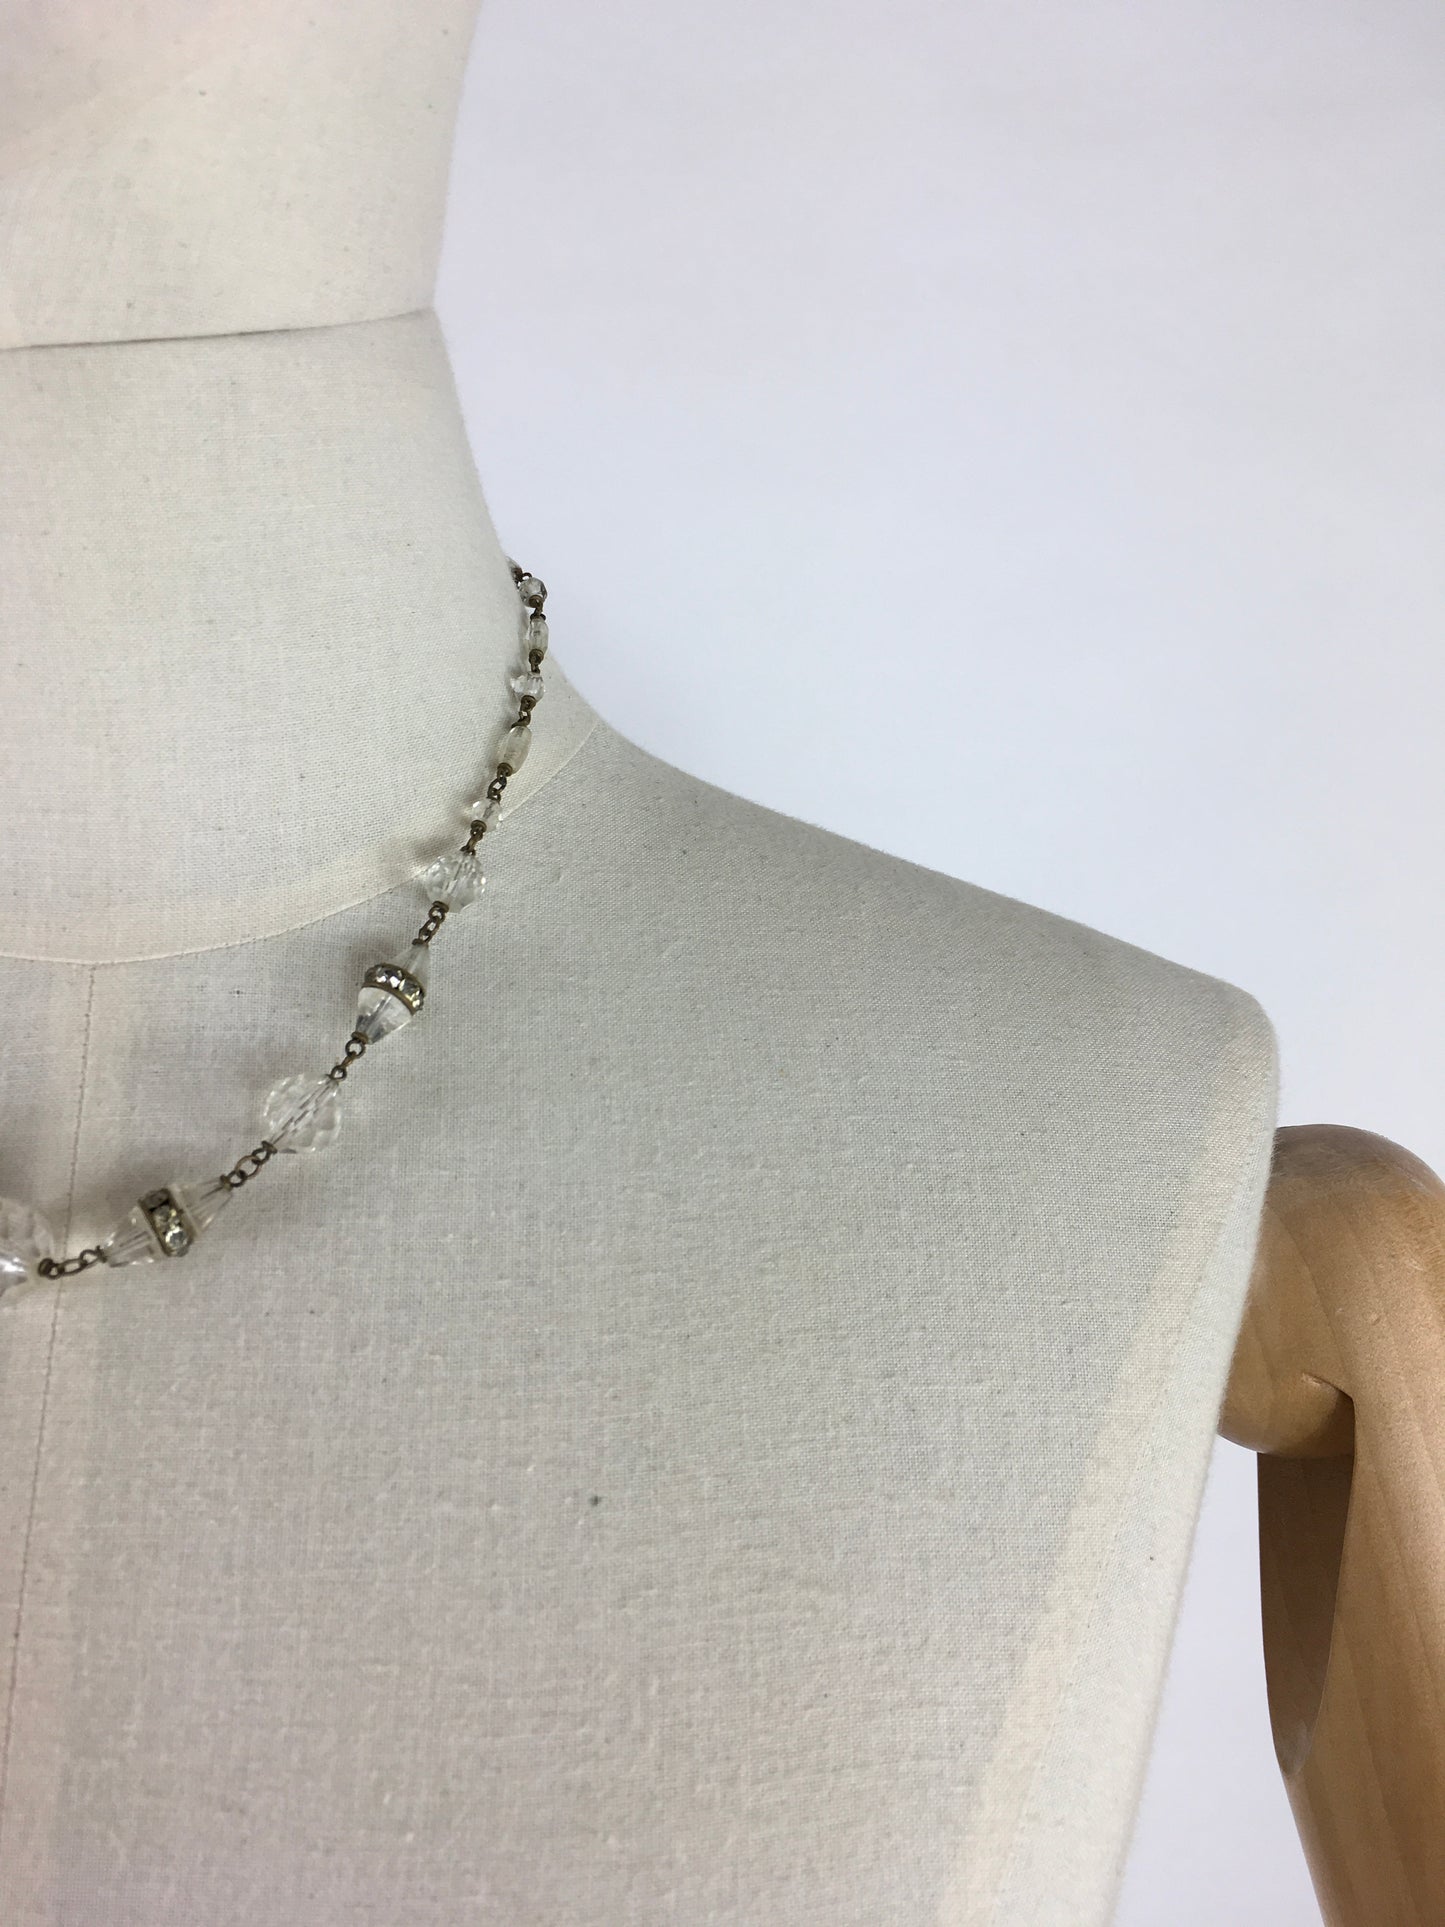 Original 1930’s Necklace - In Glass Beads with Marquesite Detailing and Screw Back Clasp